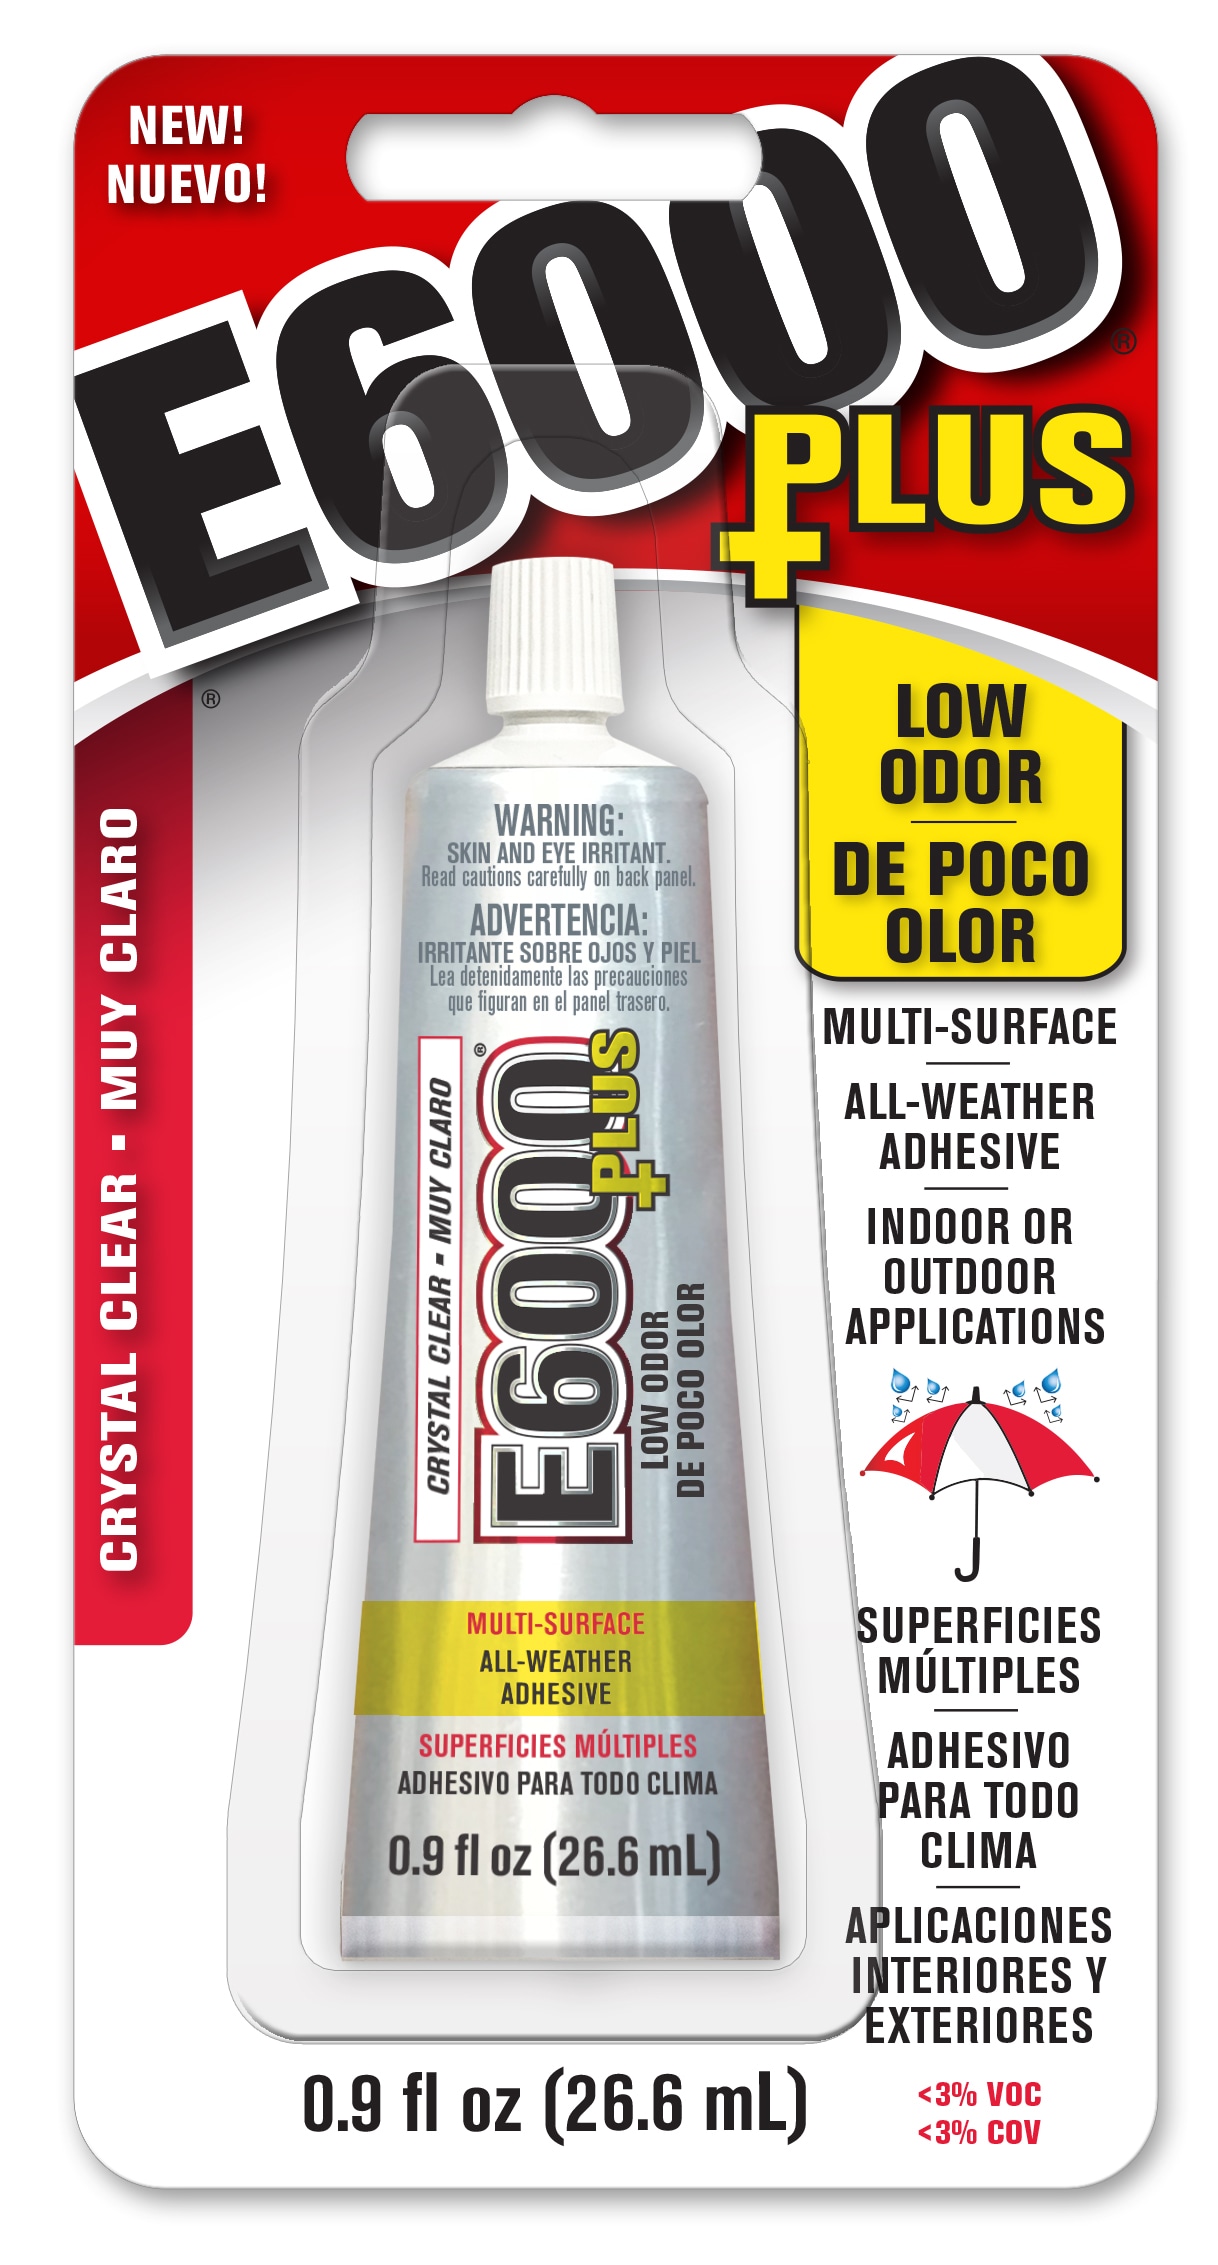 E-6000 Automotive and Industrial Adhesive - 3.7 oz tube